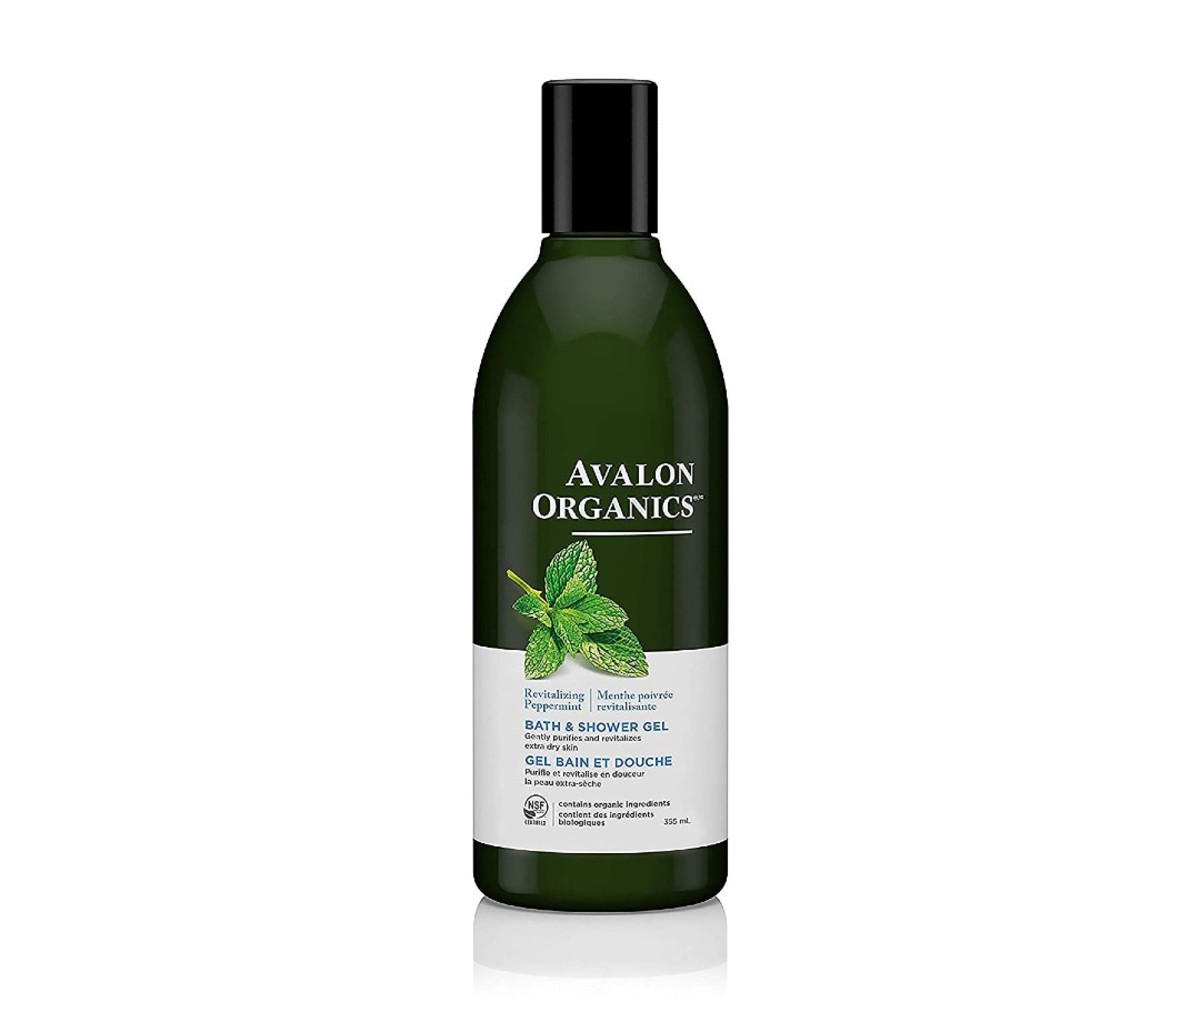 Revitalizing Peppermint Bath and Shower Gel